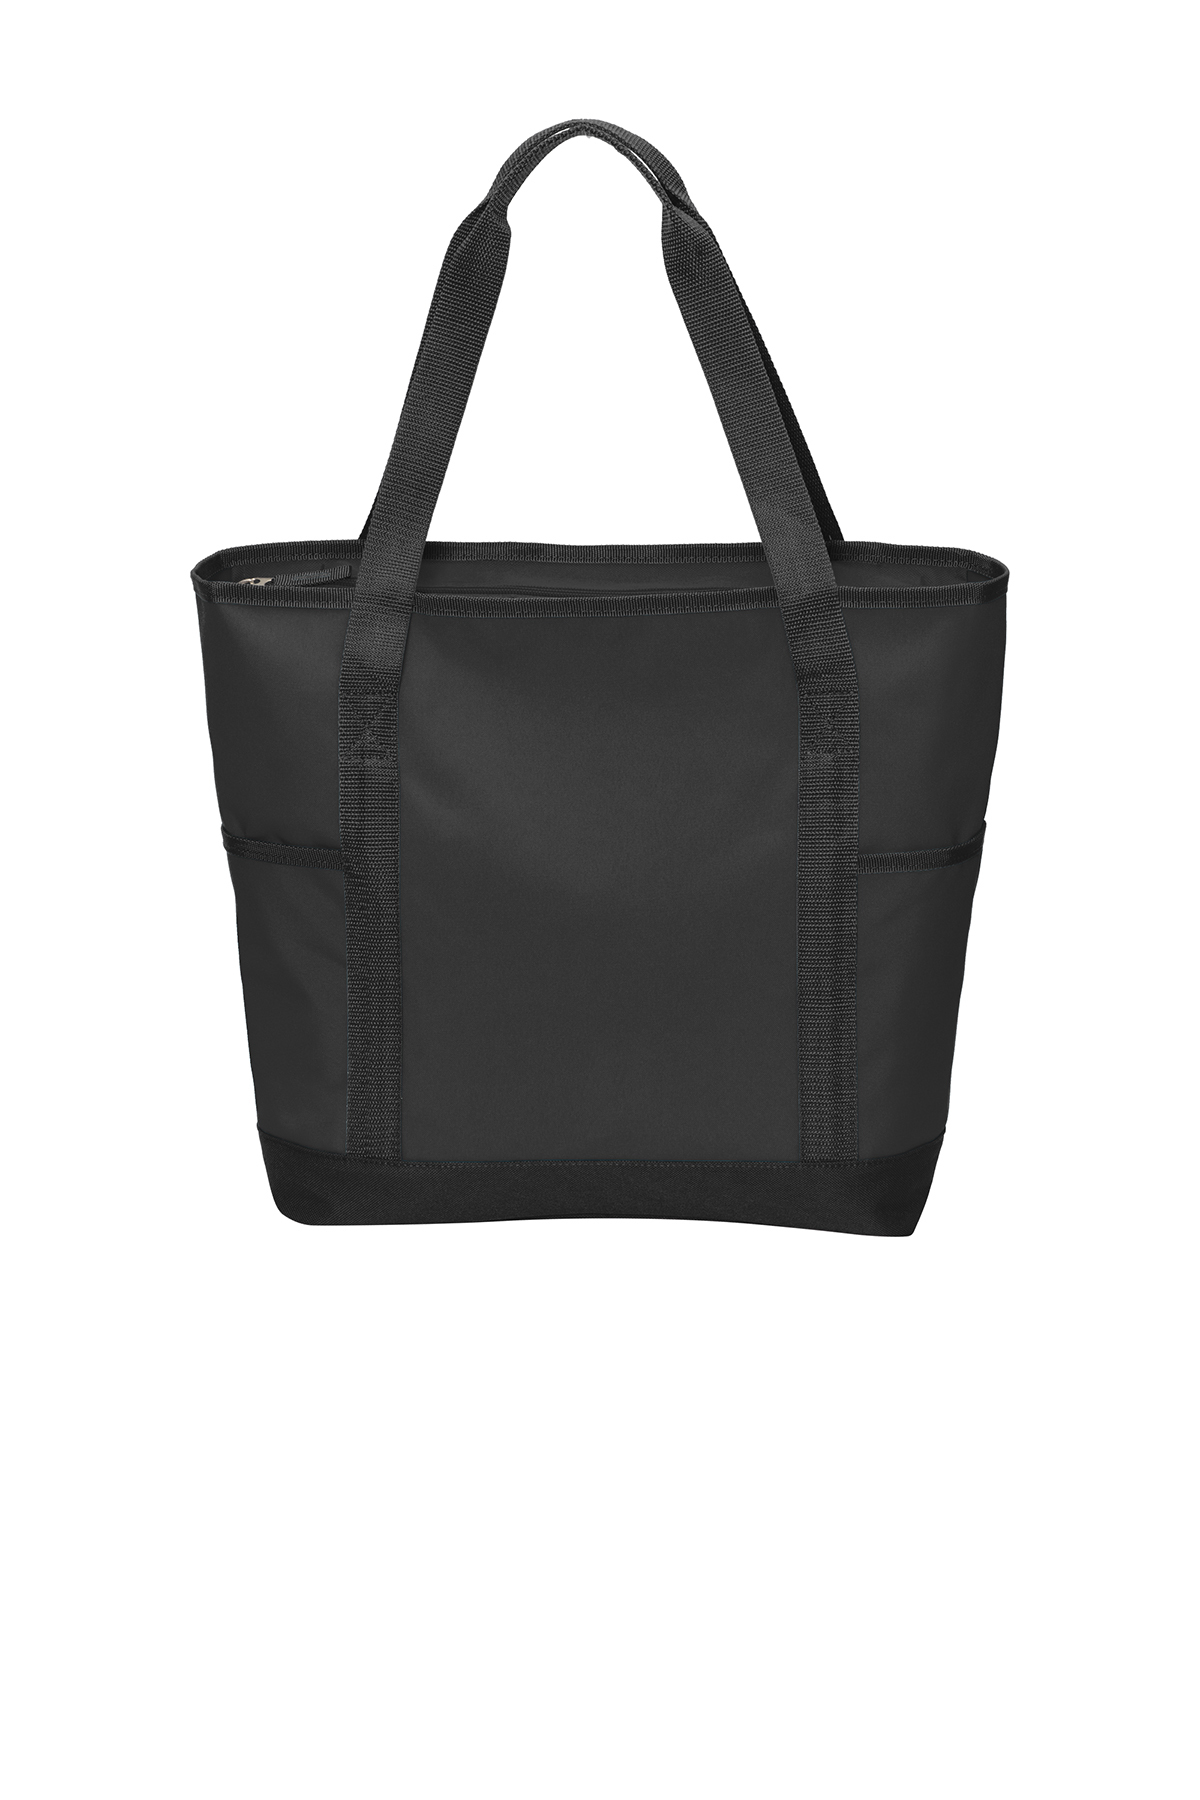 Port Authority ® On-The-Go Tote | Product | SanMar